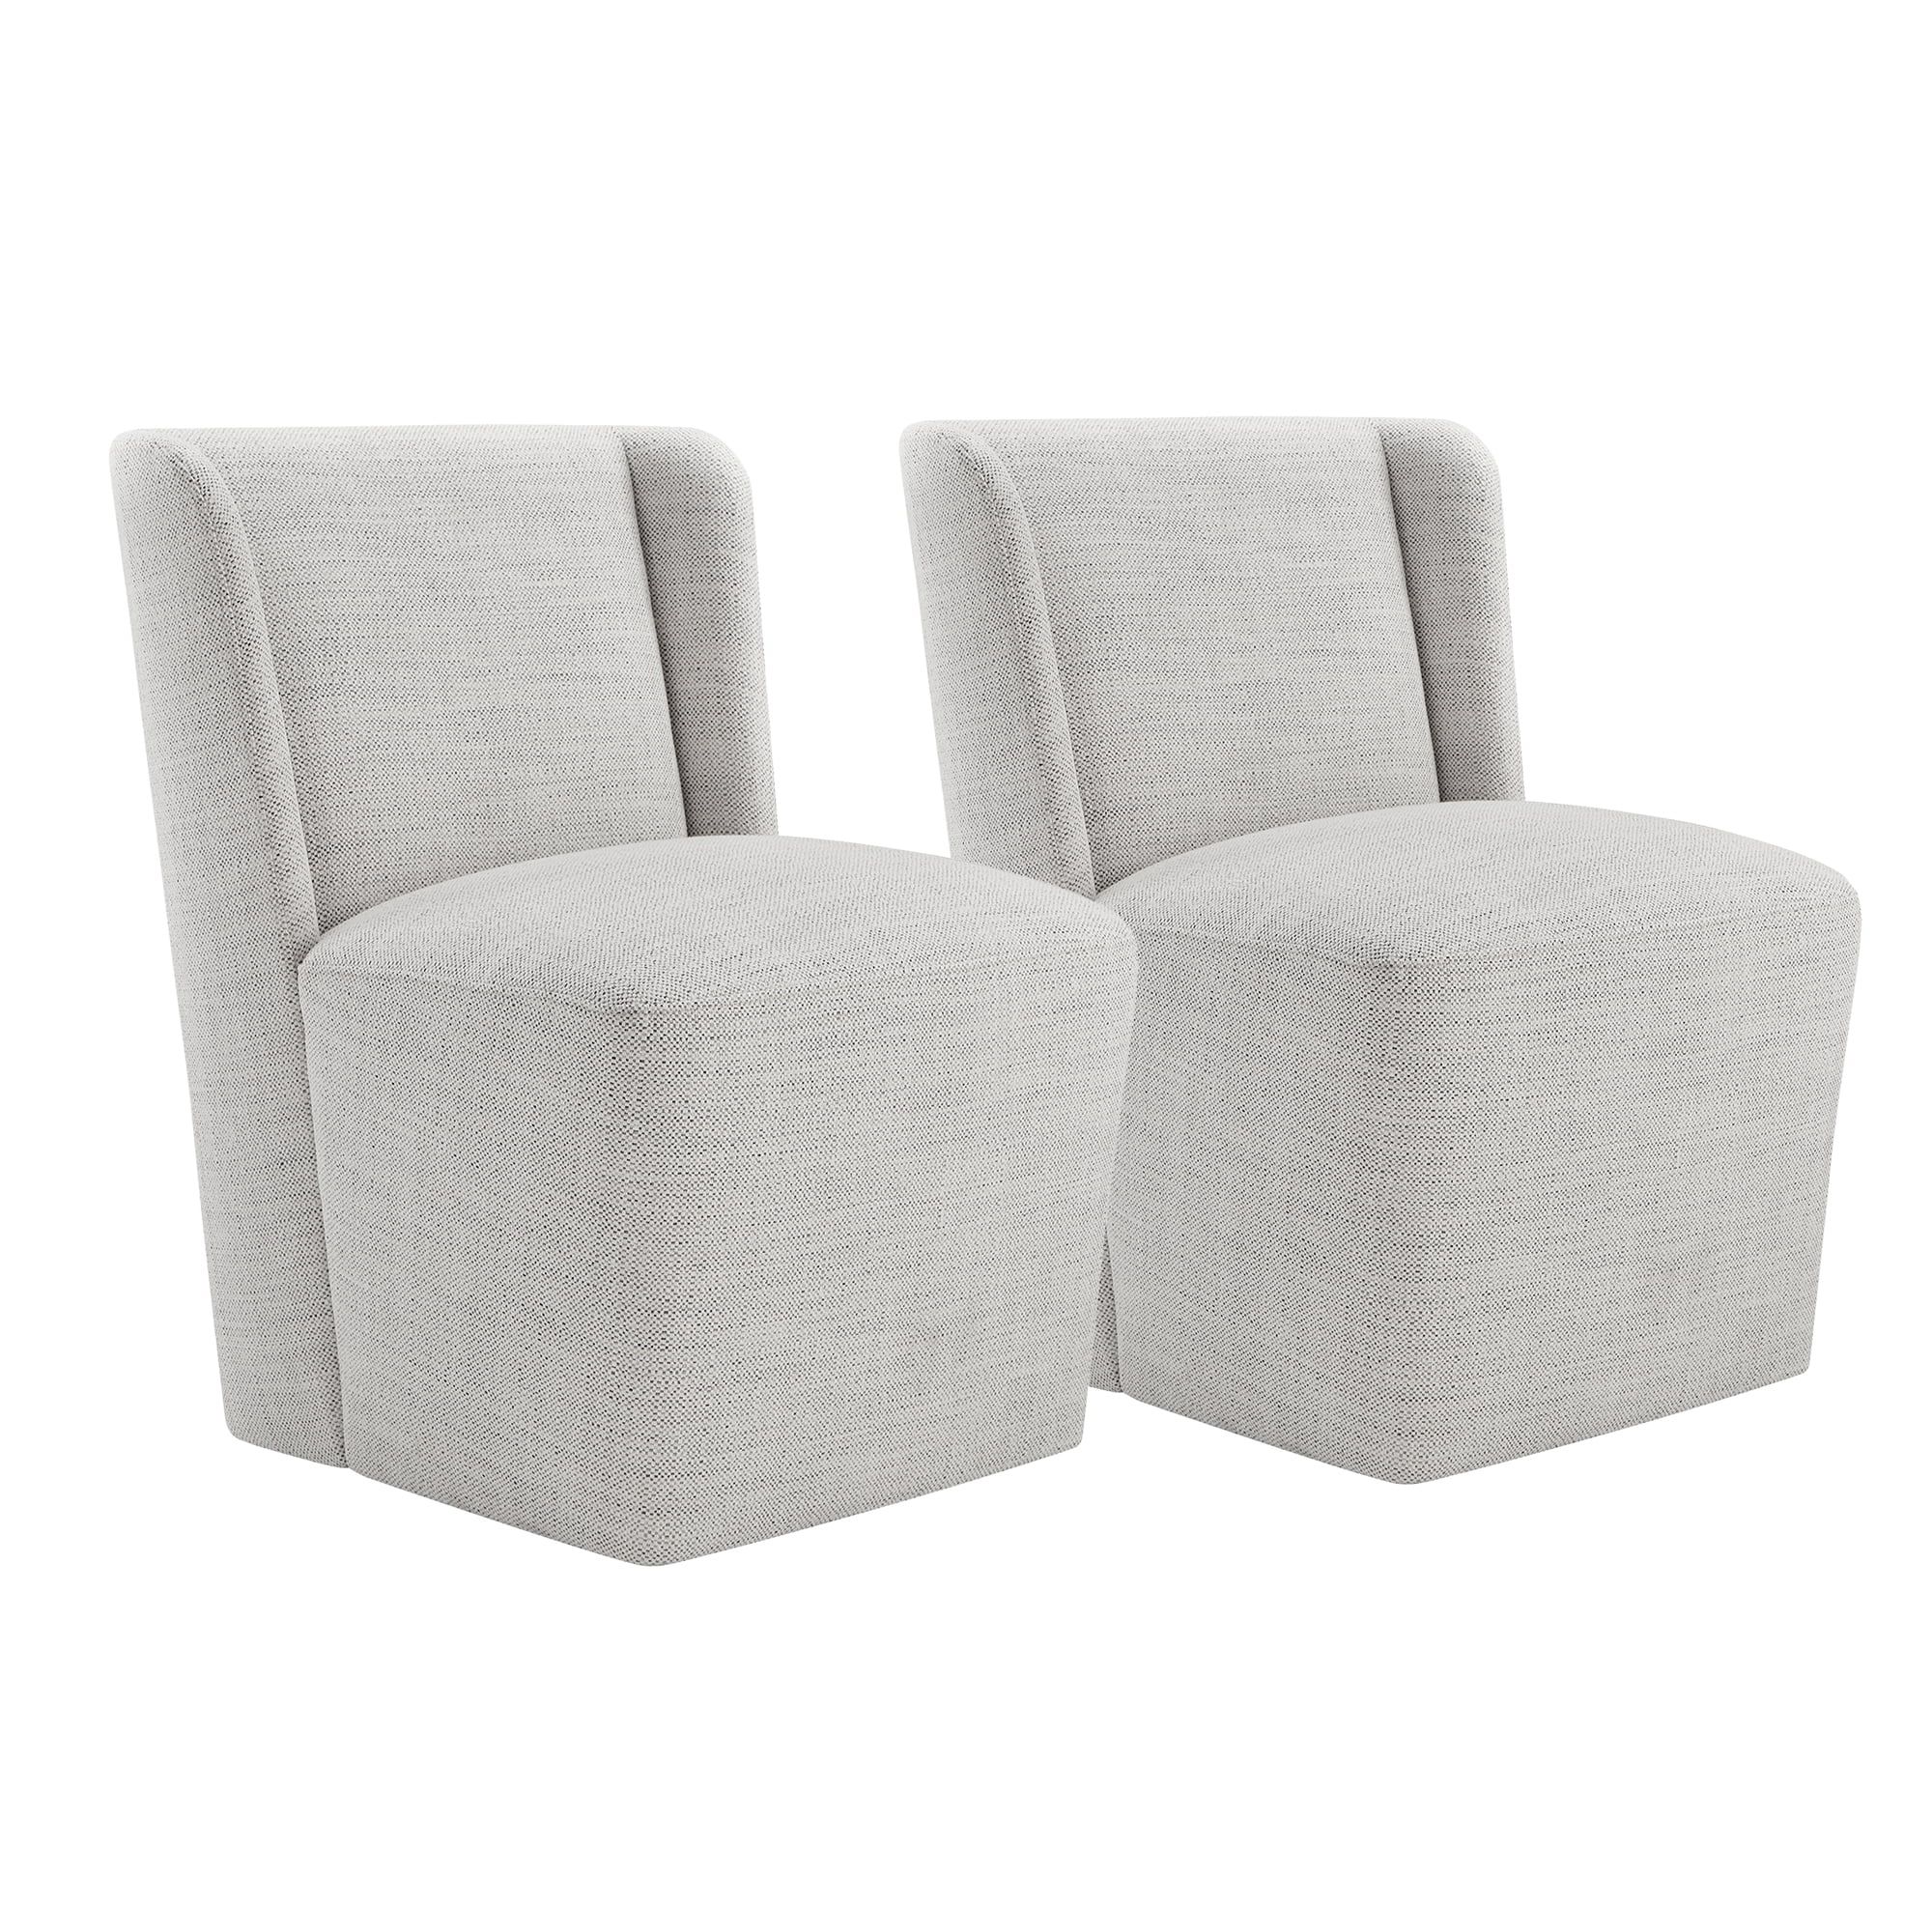 CHITA Modern Dining Chair with Casters Set of 2, Upholstered Dining Room Chairs, Fabric in Ivory ... | Walmart (US)